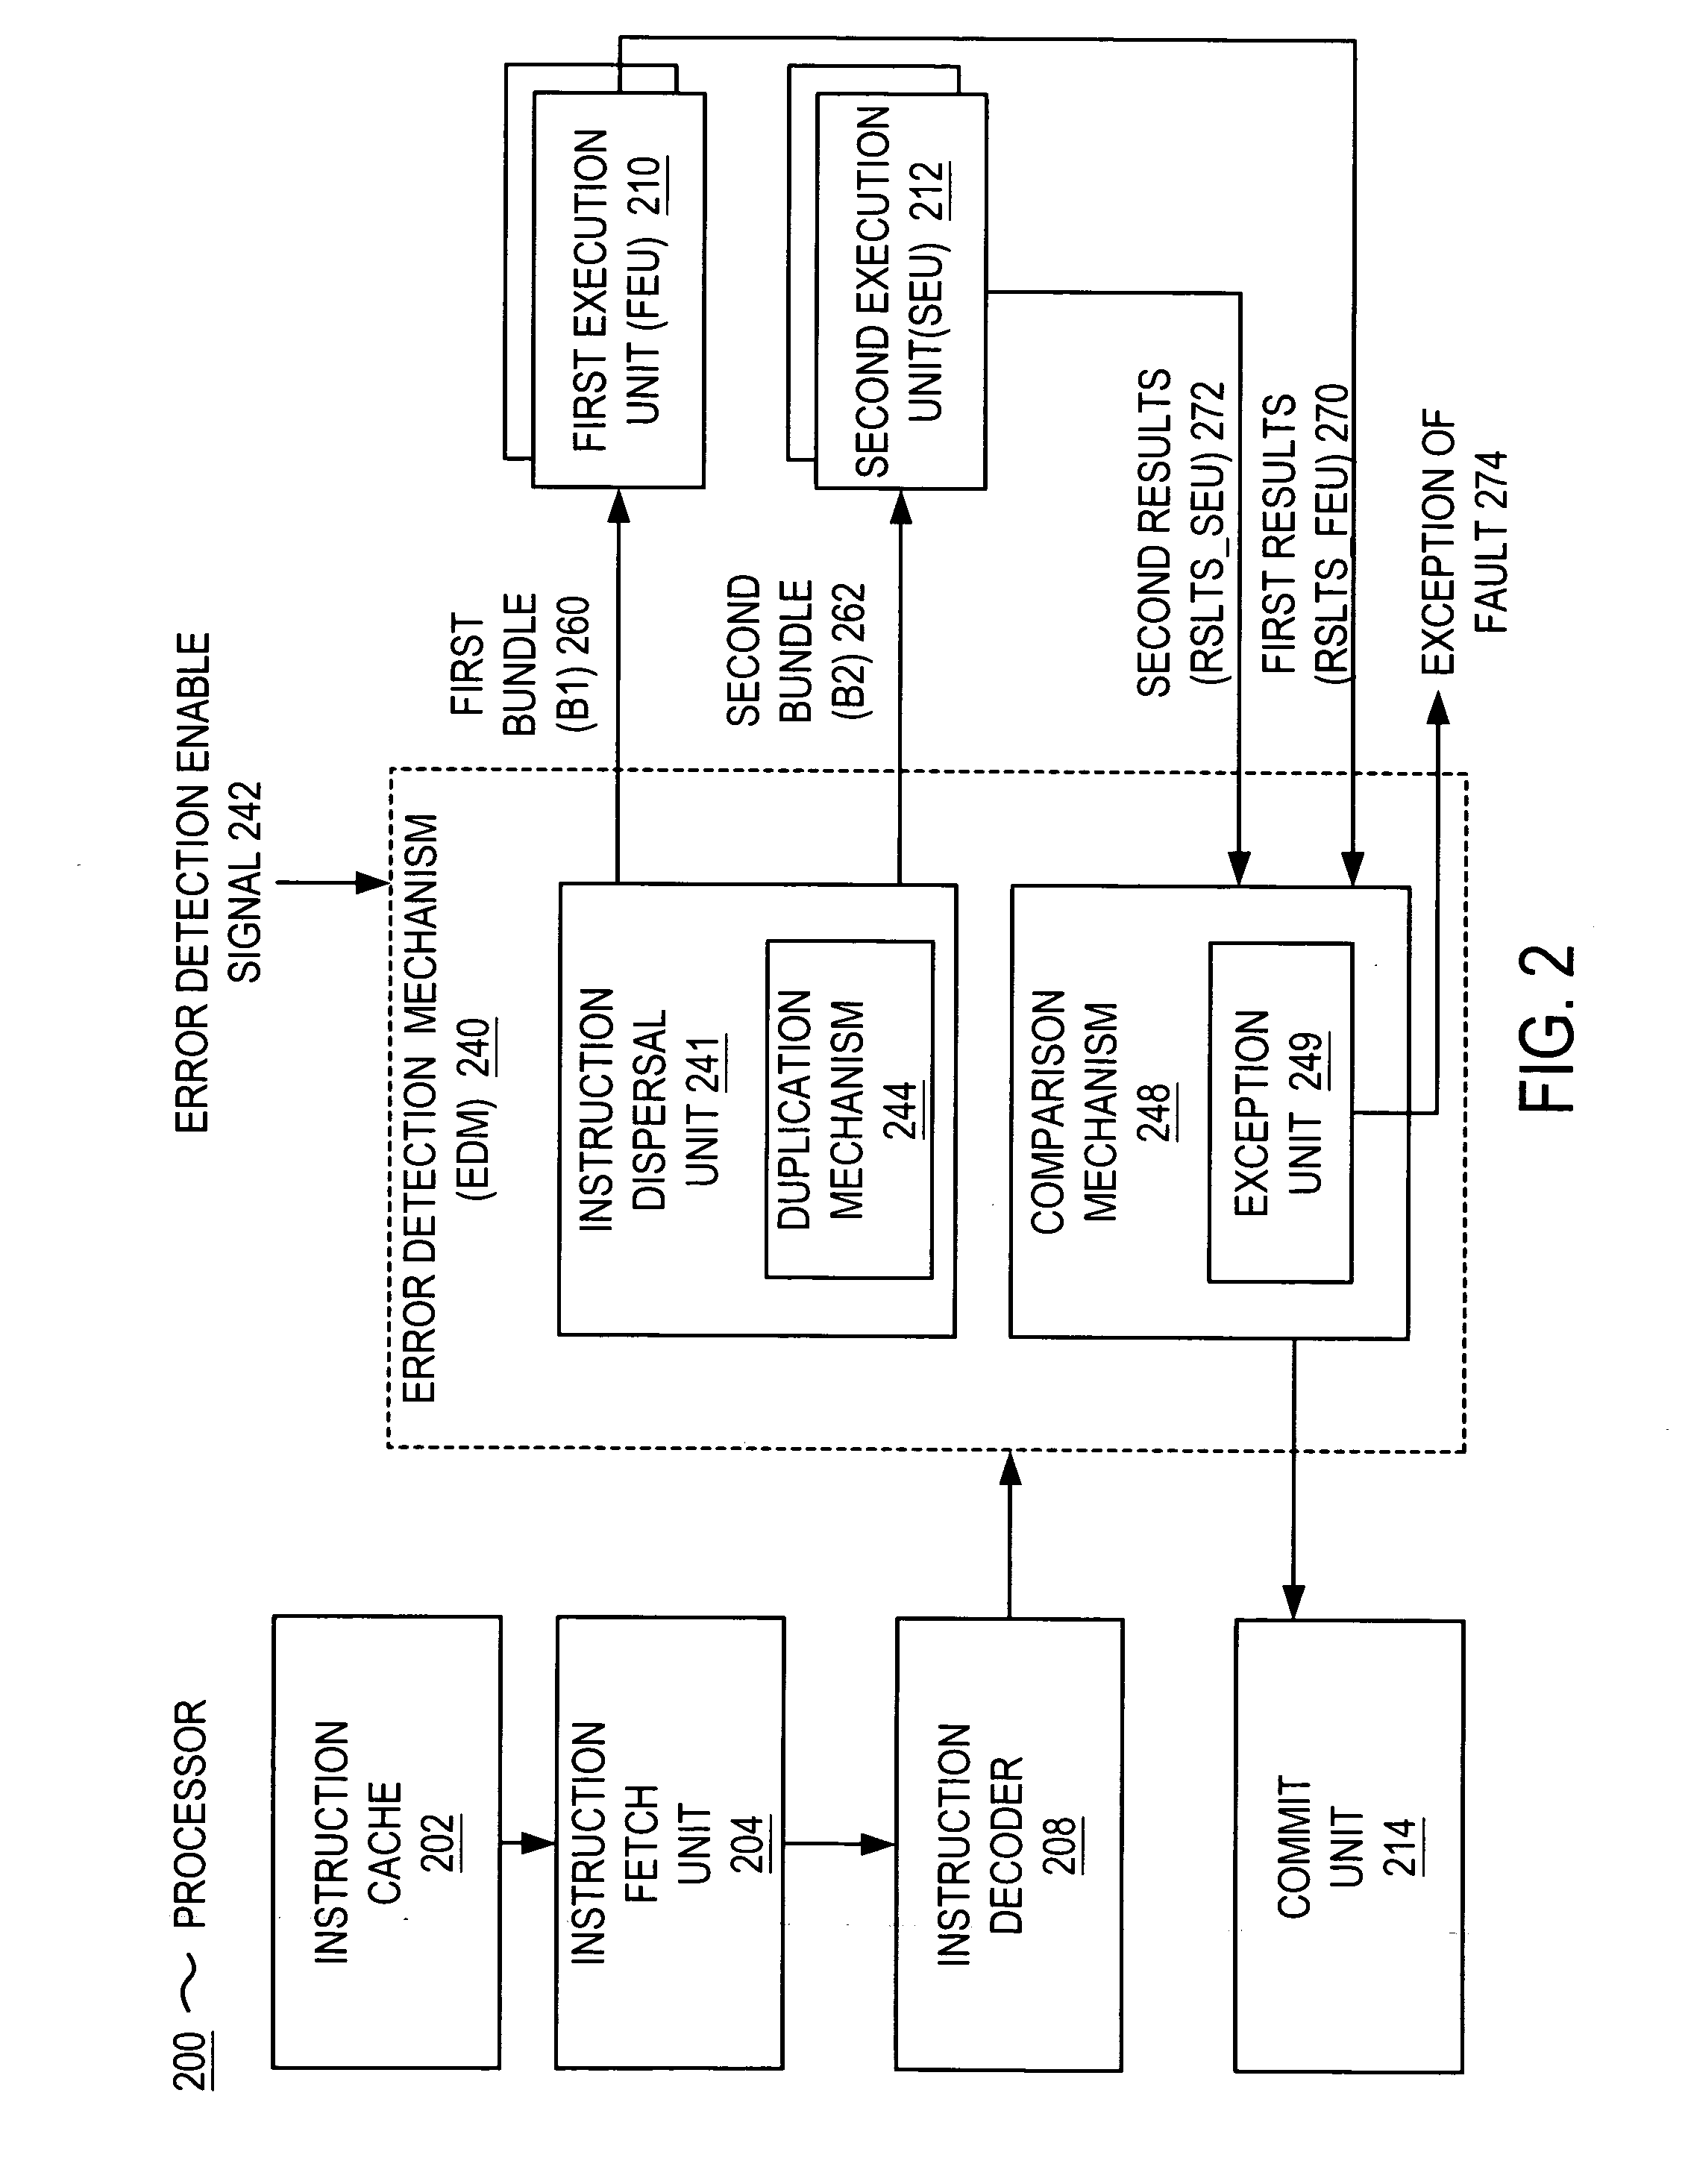 Error detection method and system for processors that employs lockstepped concurrent threads